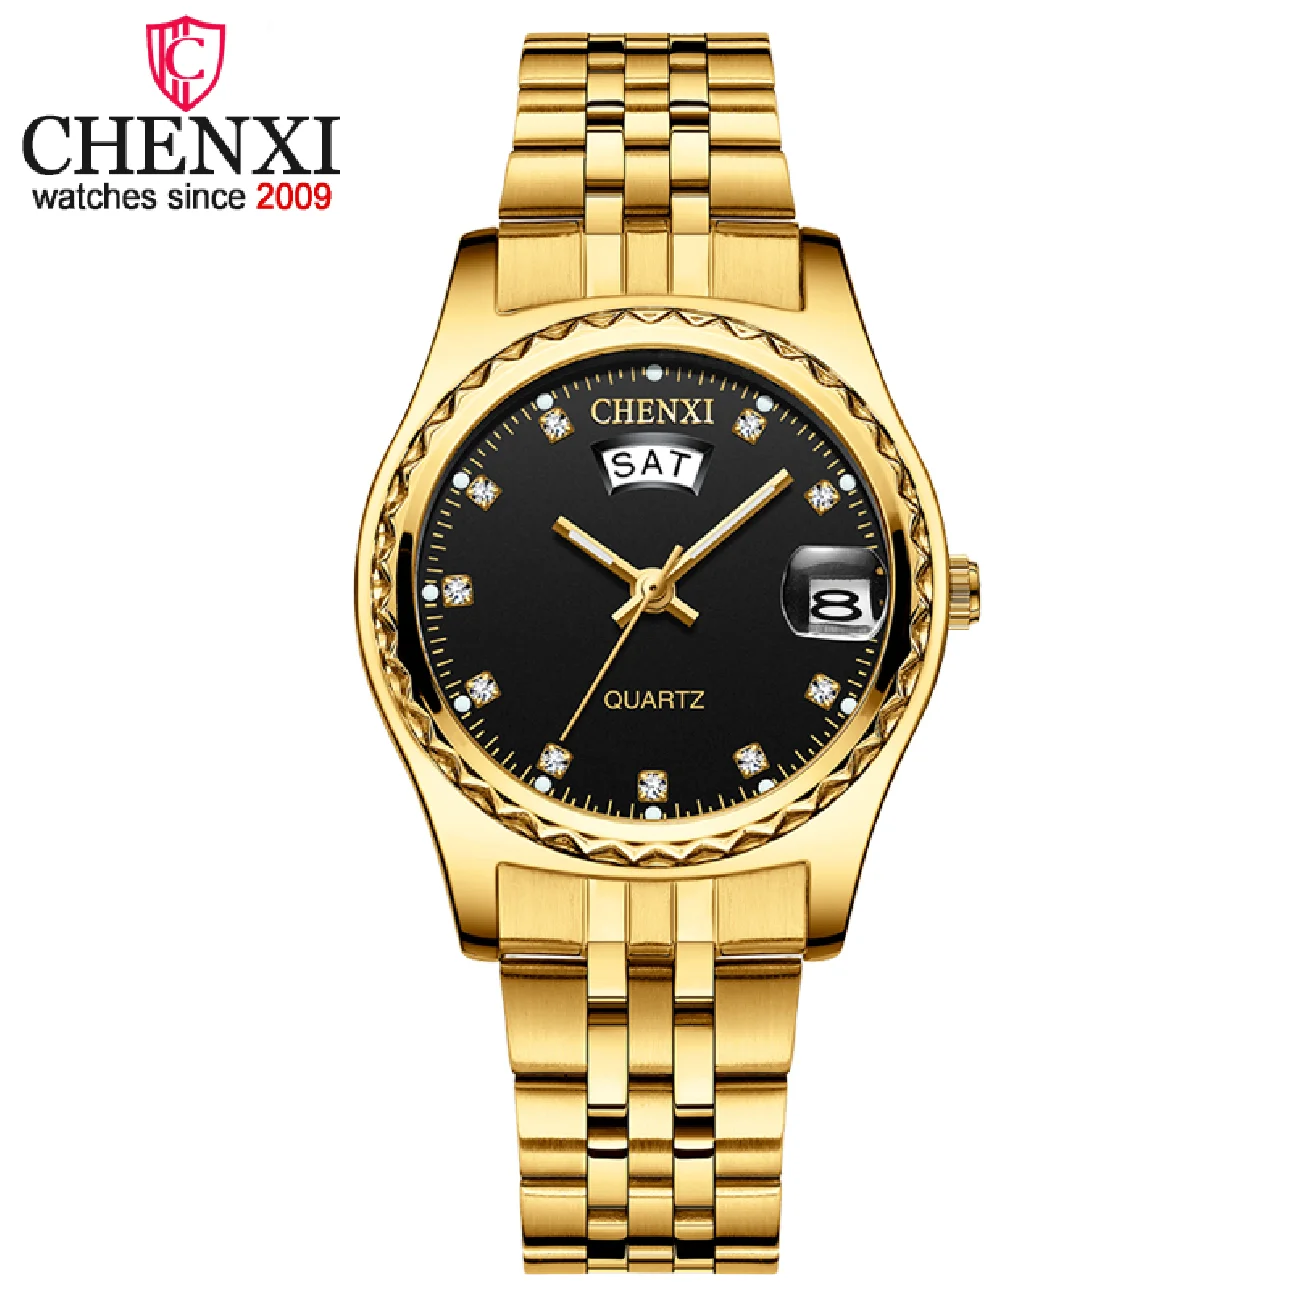 Enlarge CHENXI Women Luxury Quartz Watches Ladies Golden Stainless Steel Wrist Watch High Quality Casual Waterproof Watch Gift for Wife